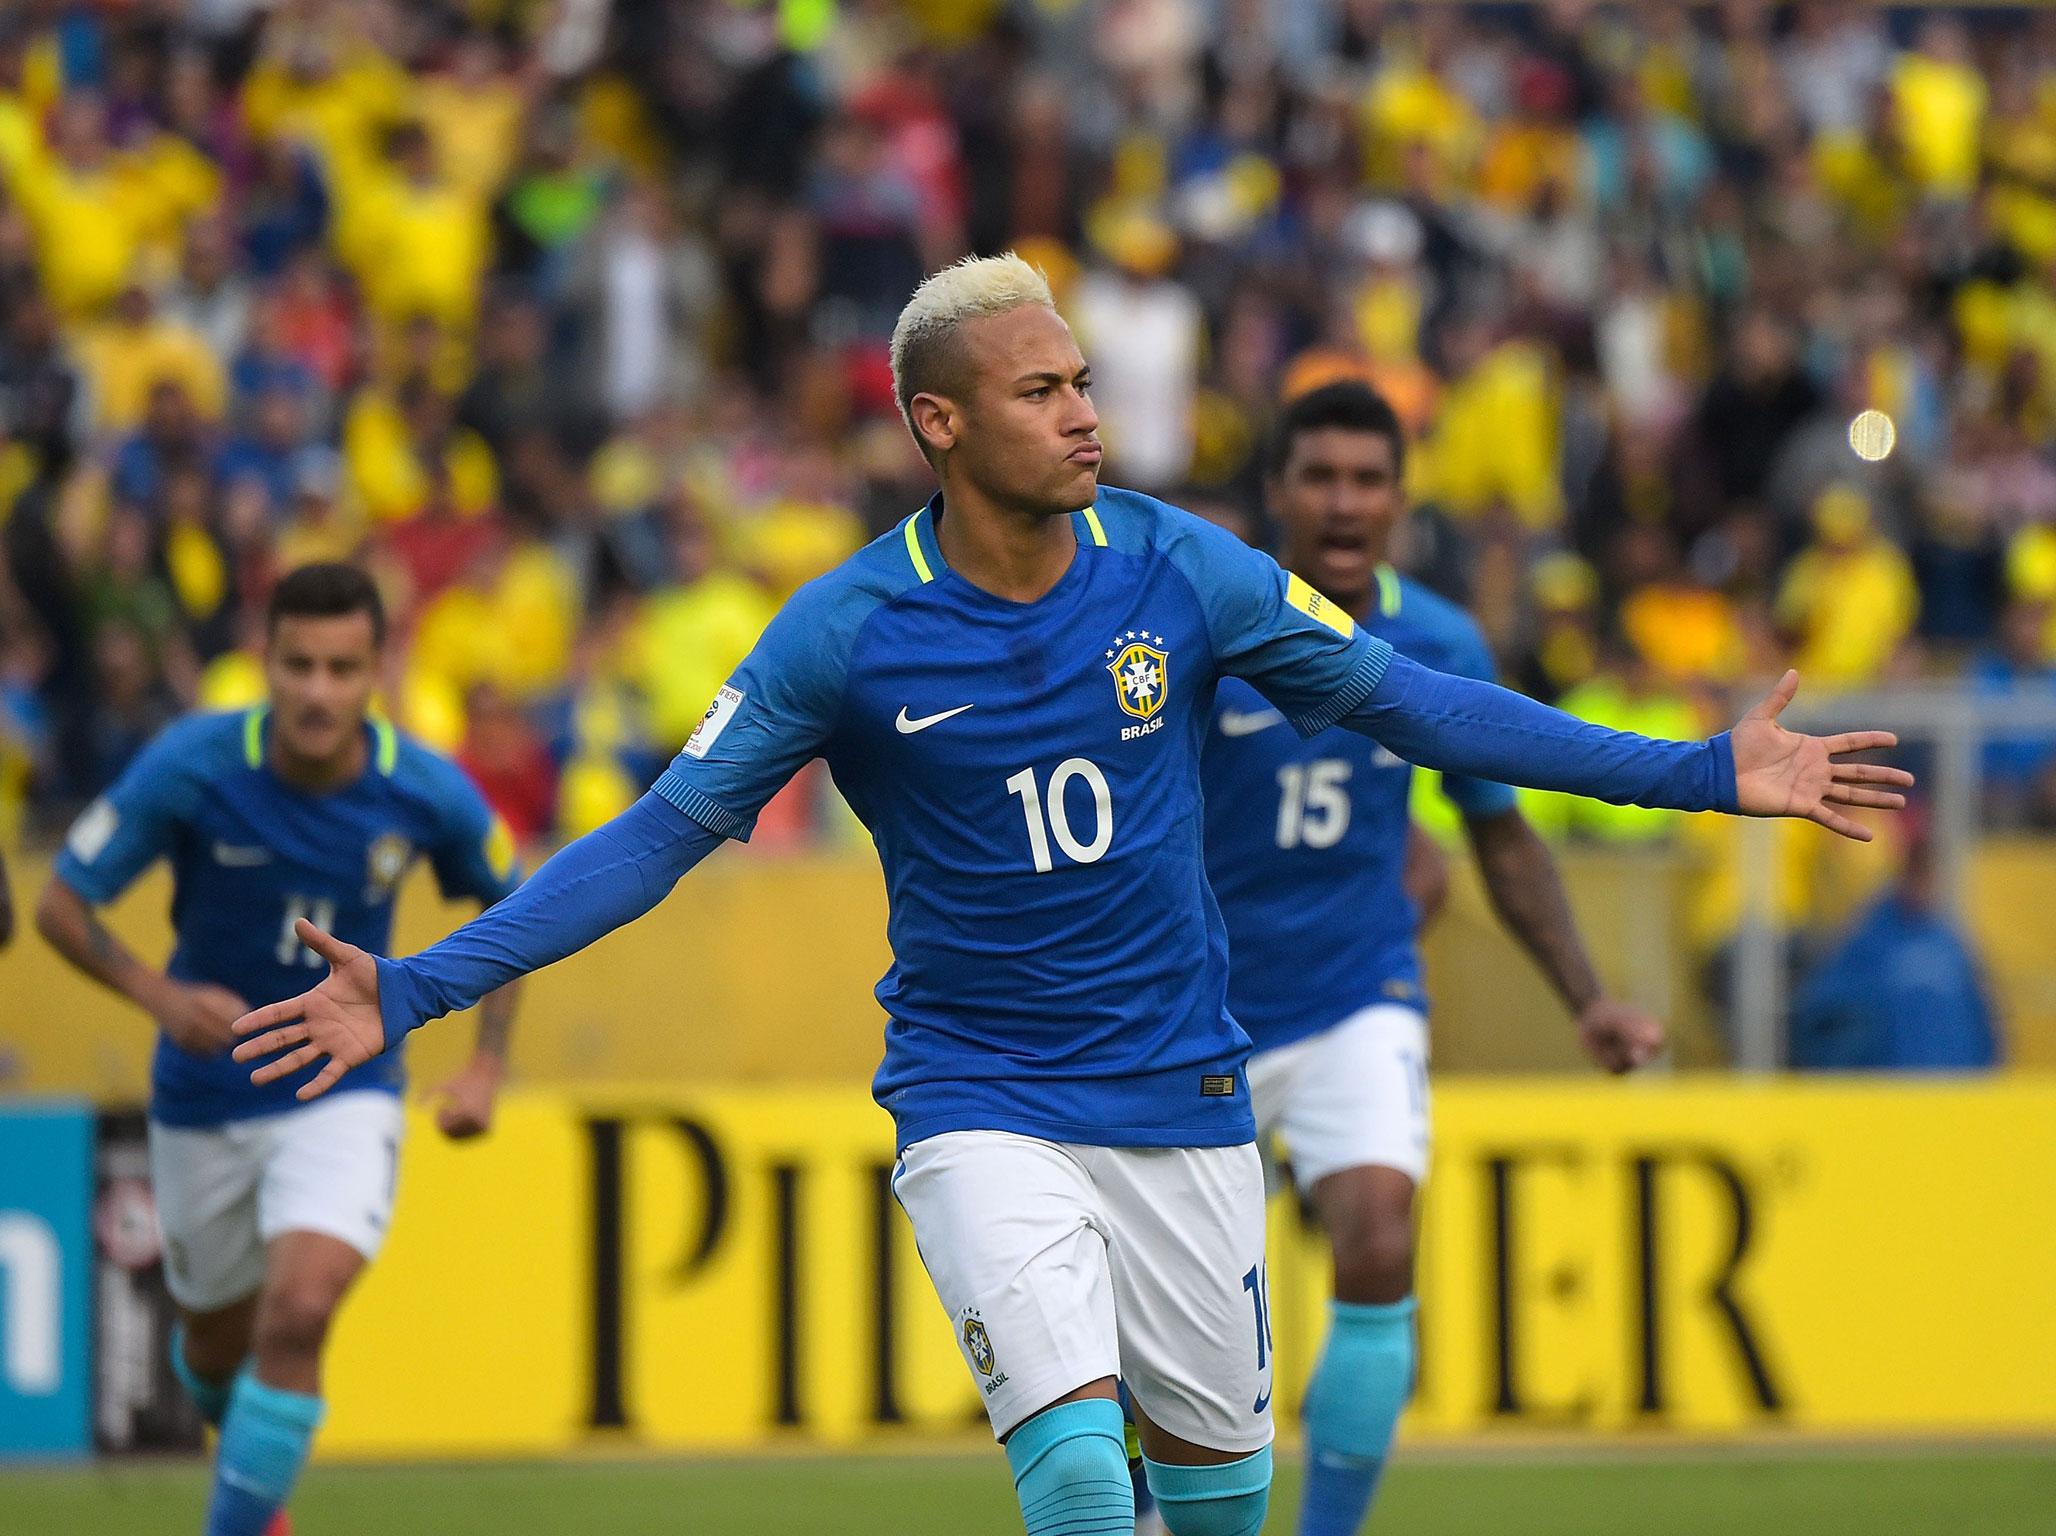 Neymar scored from spot in Quito and the Tite revolution was born